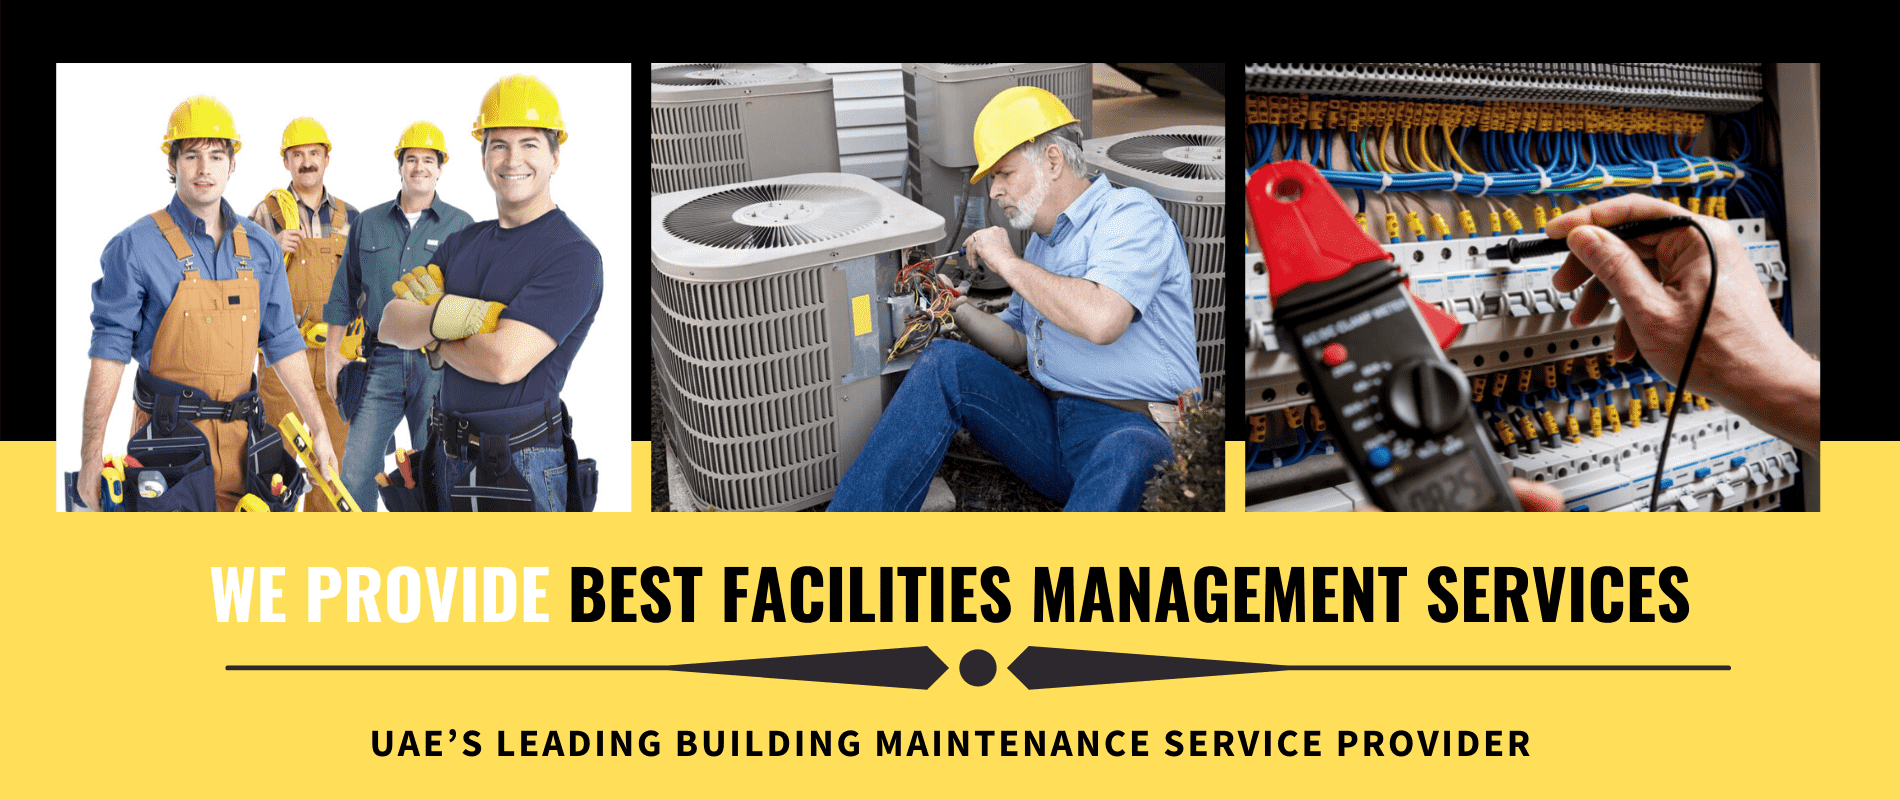 we provide BEST FACILITIES MANAGEMENT SERVICES-min